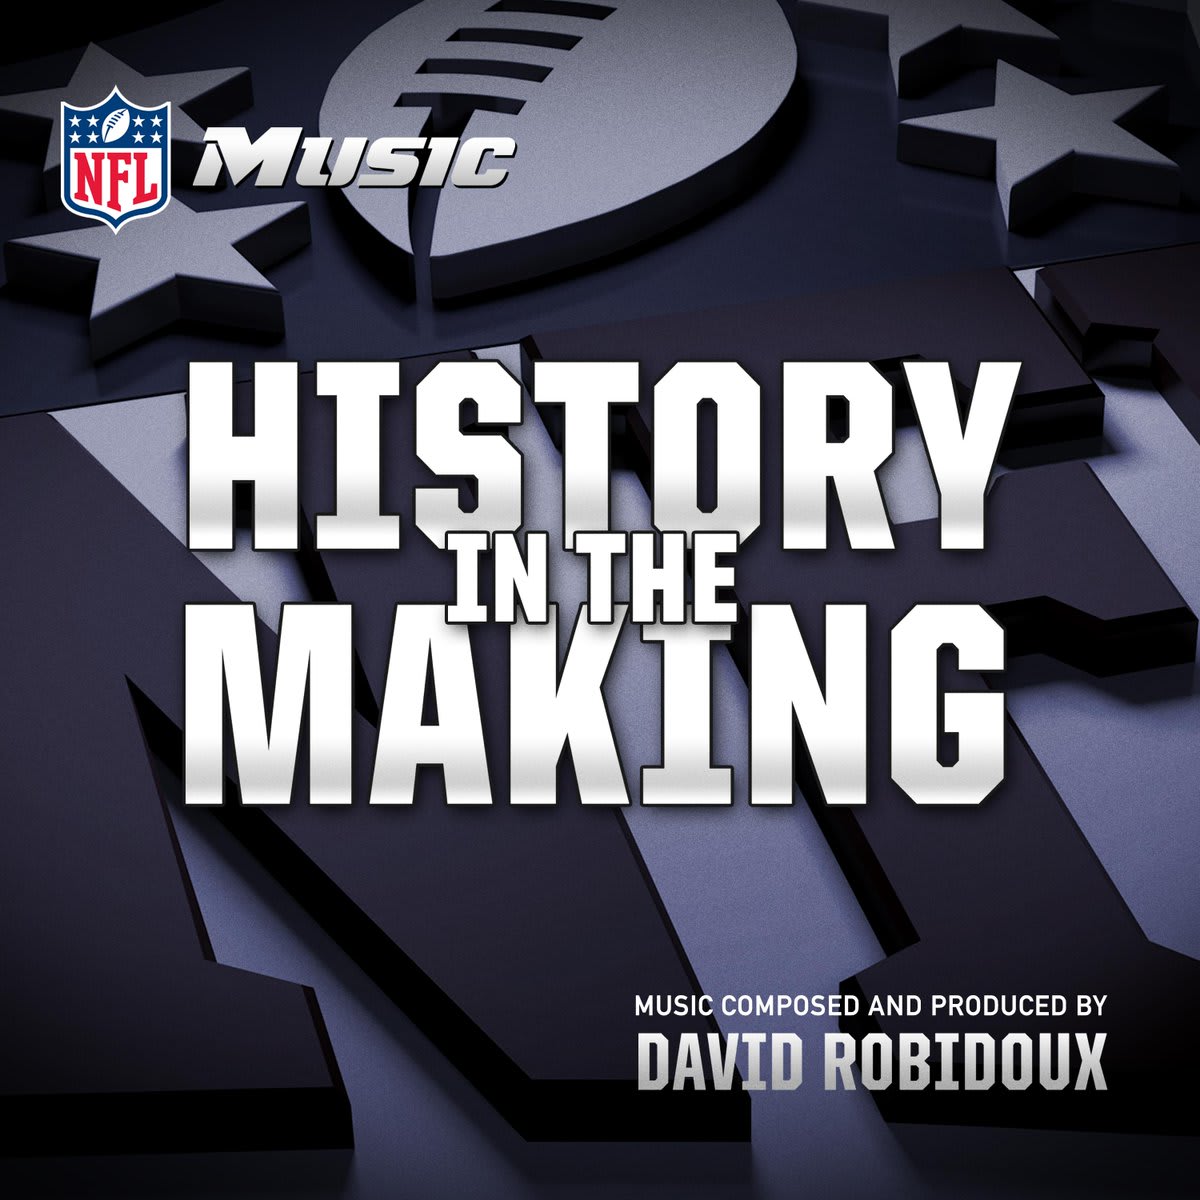 Hope you enjoyed all the music released in 2019! Timeless NFL Music from Super Bowl LII - “History In The Making” is now available on all digital platforms: